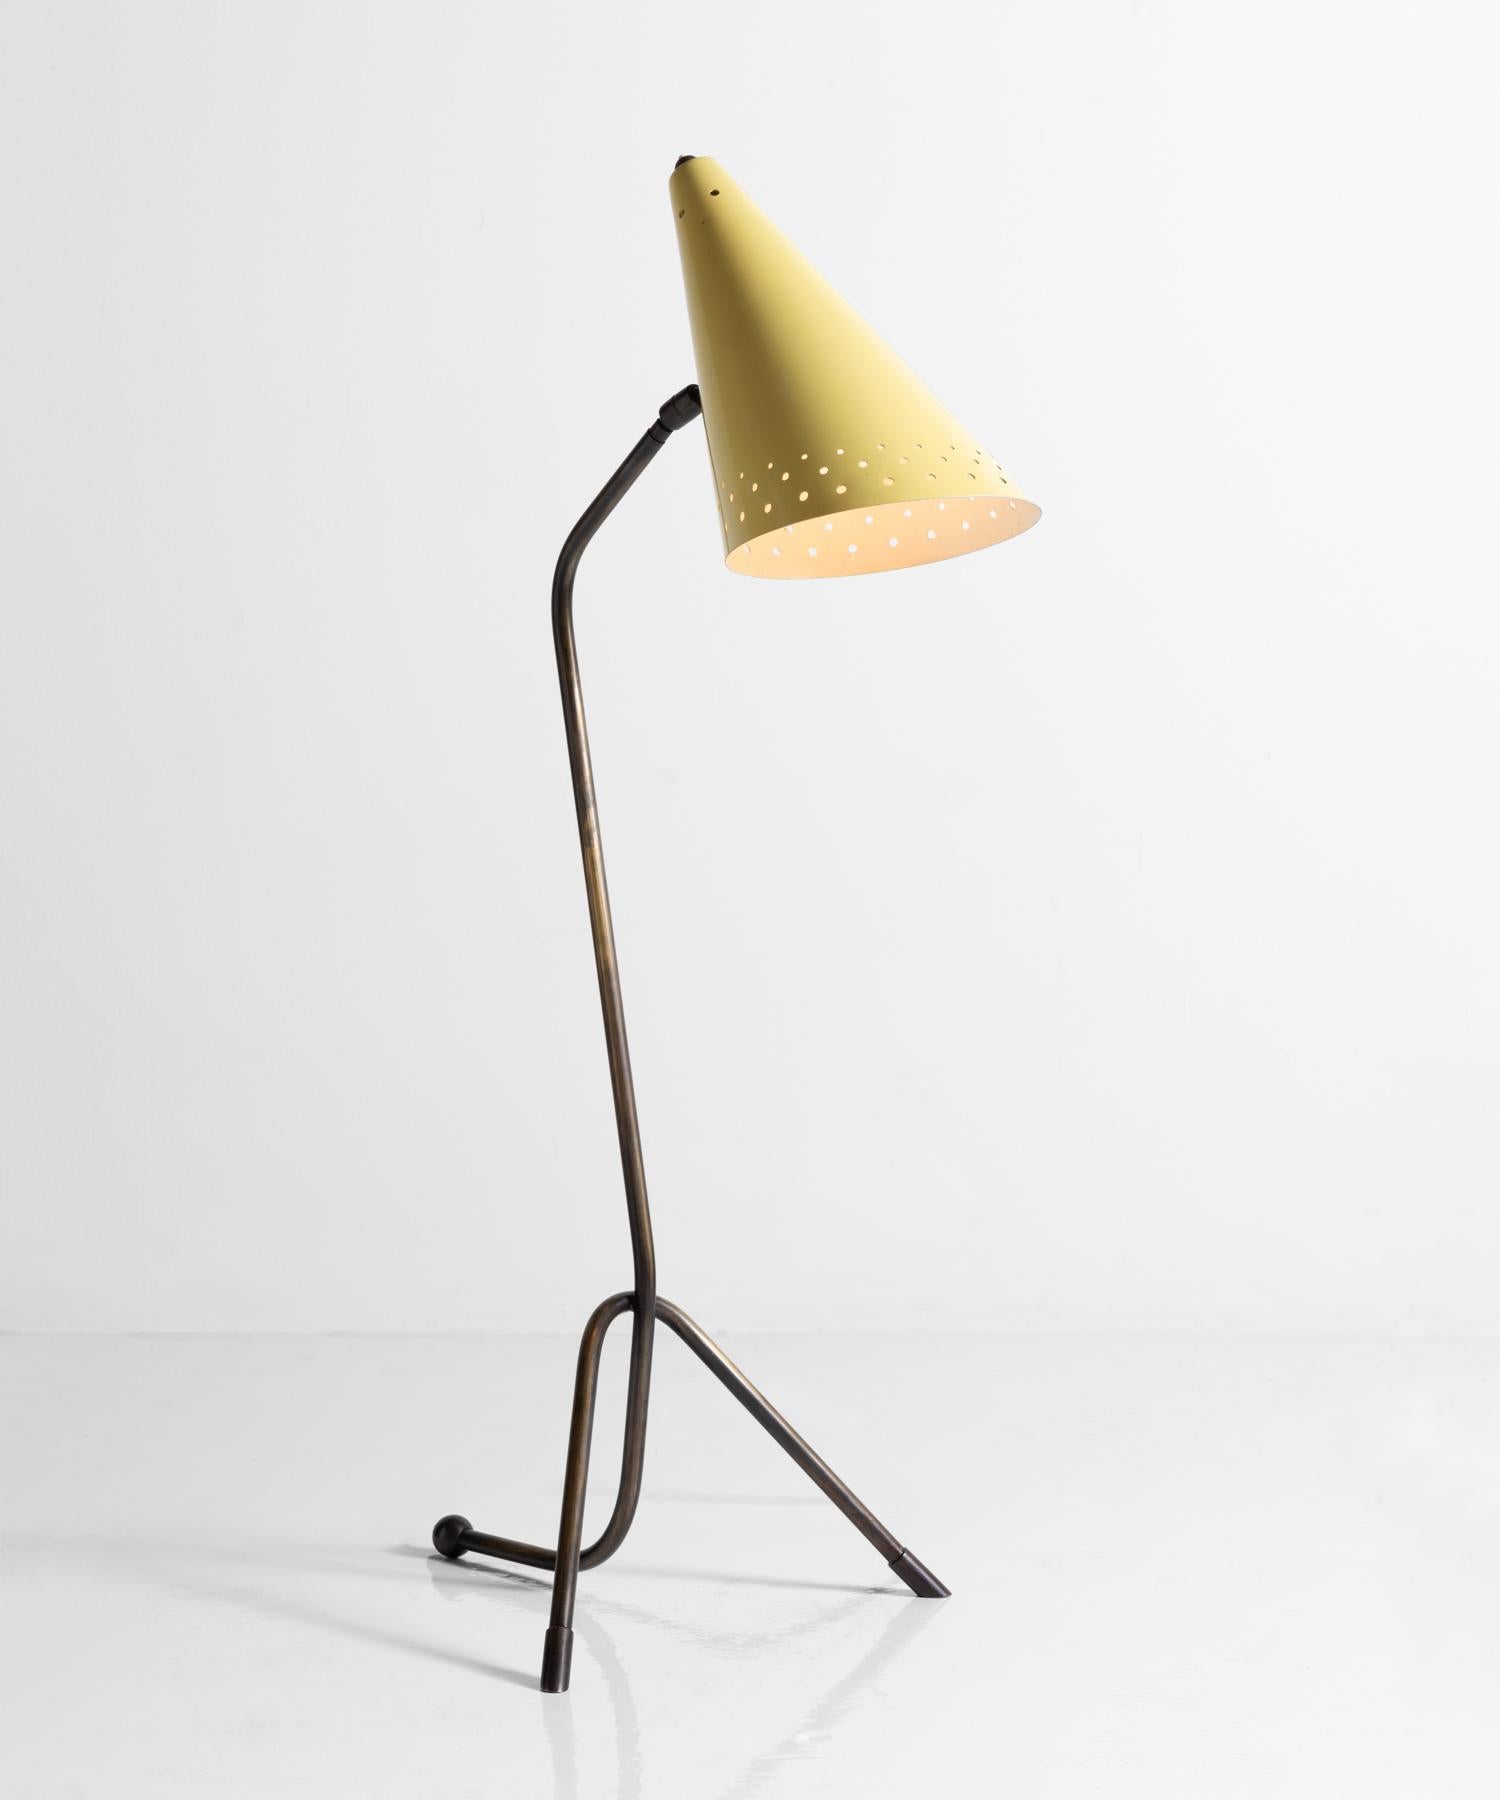 Brass & Metal Modern Table Lamp, Italy, circa 1950

Elegant and minimal form with pivoting shade in a beautiful soft yellow gloss.